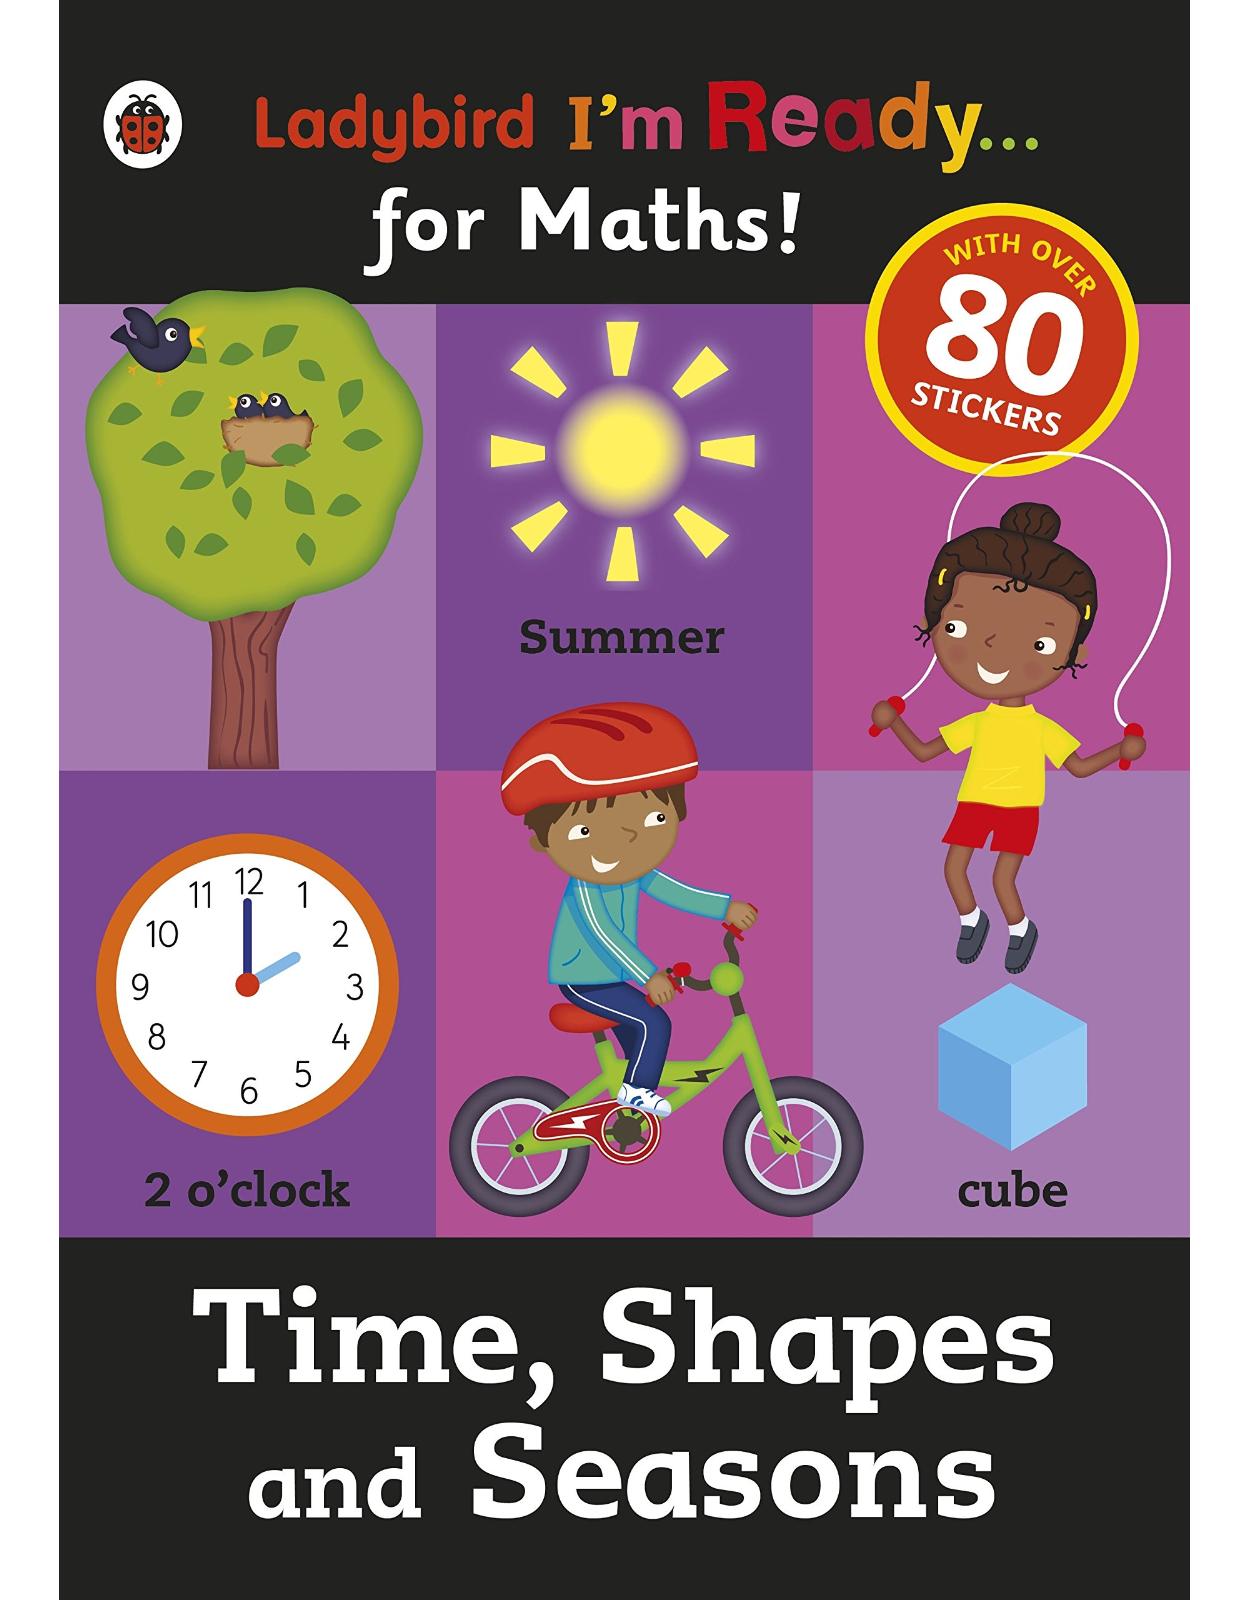 Time, Shapes and Seasons: Ladybird I'm Ready for Maths sticker workbook